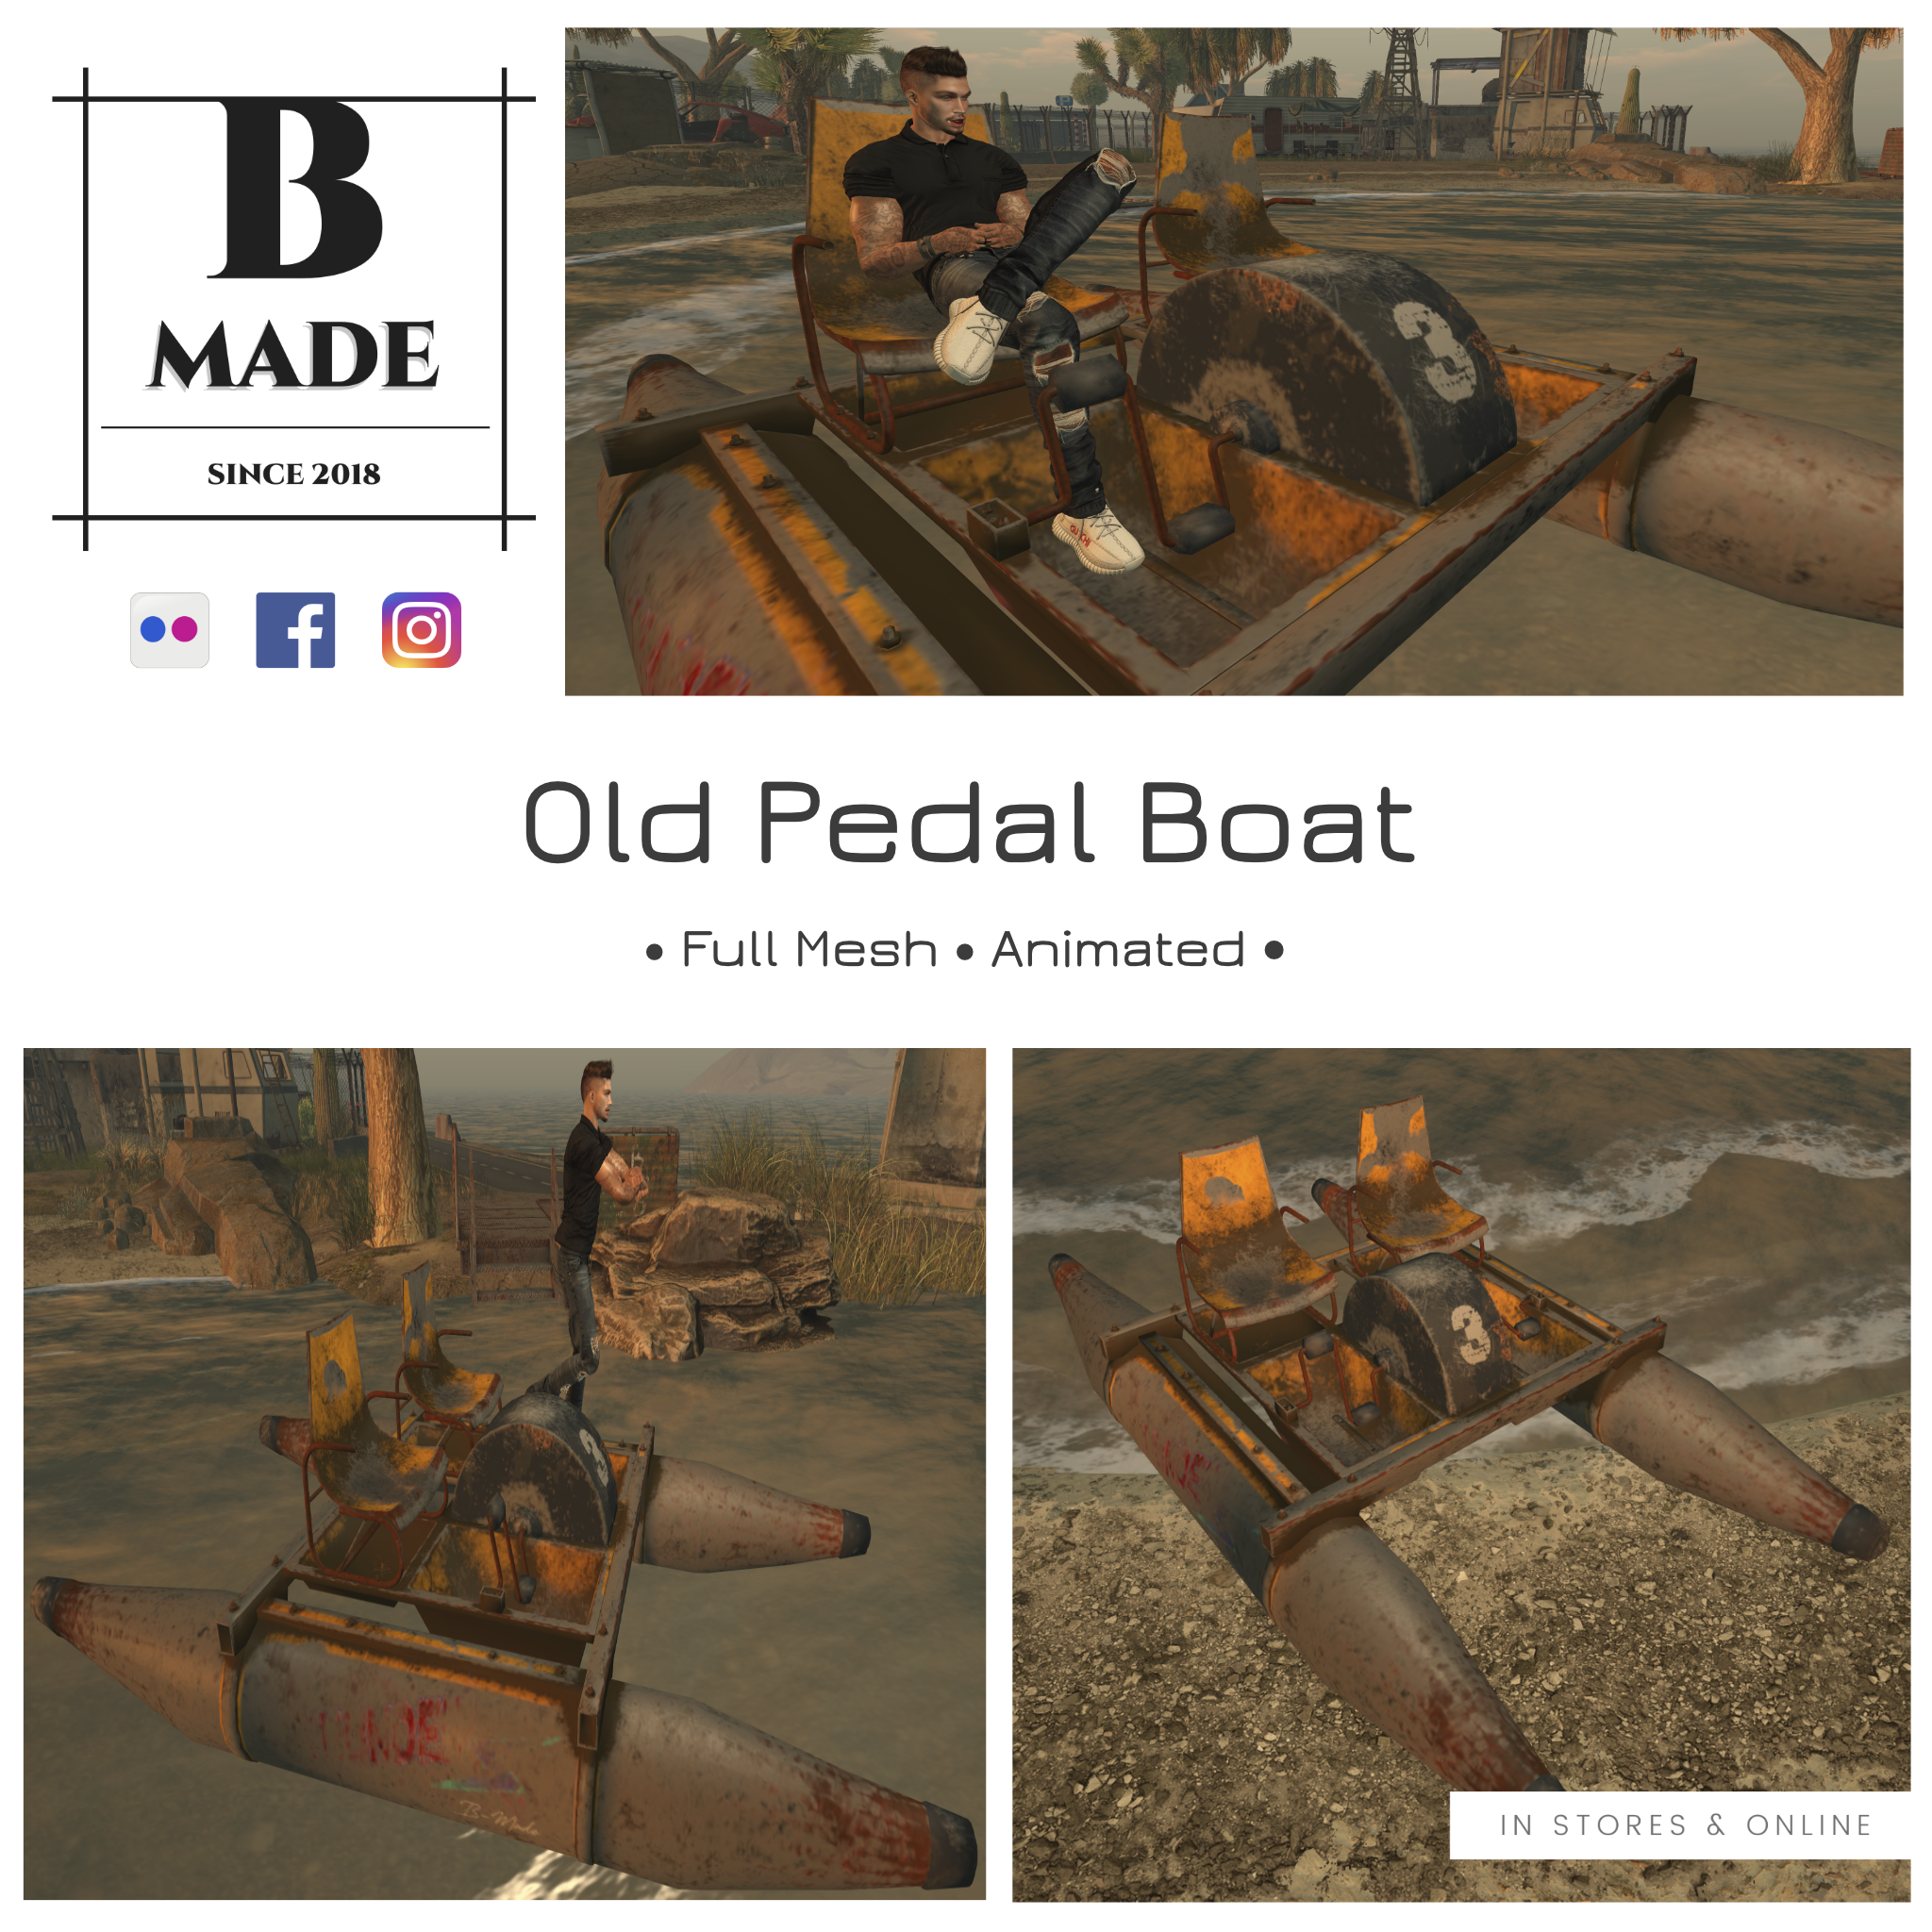 B-Made – Old Pedal Boat